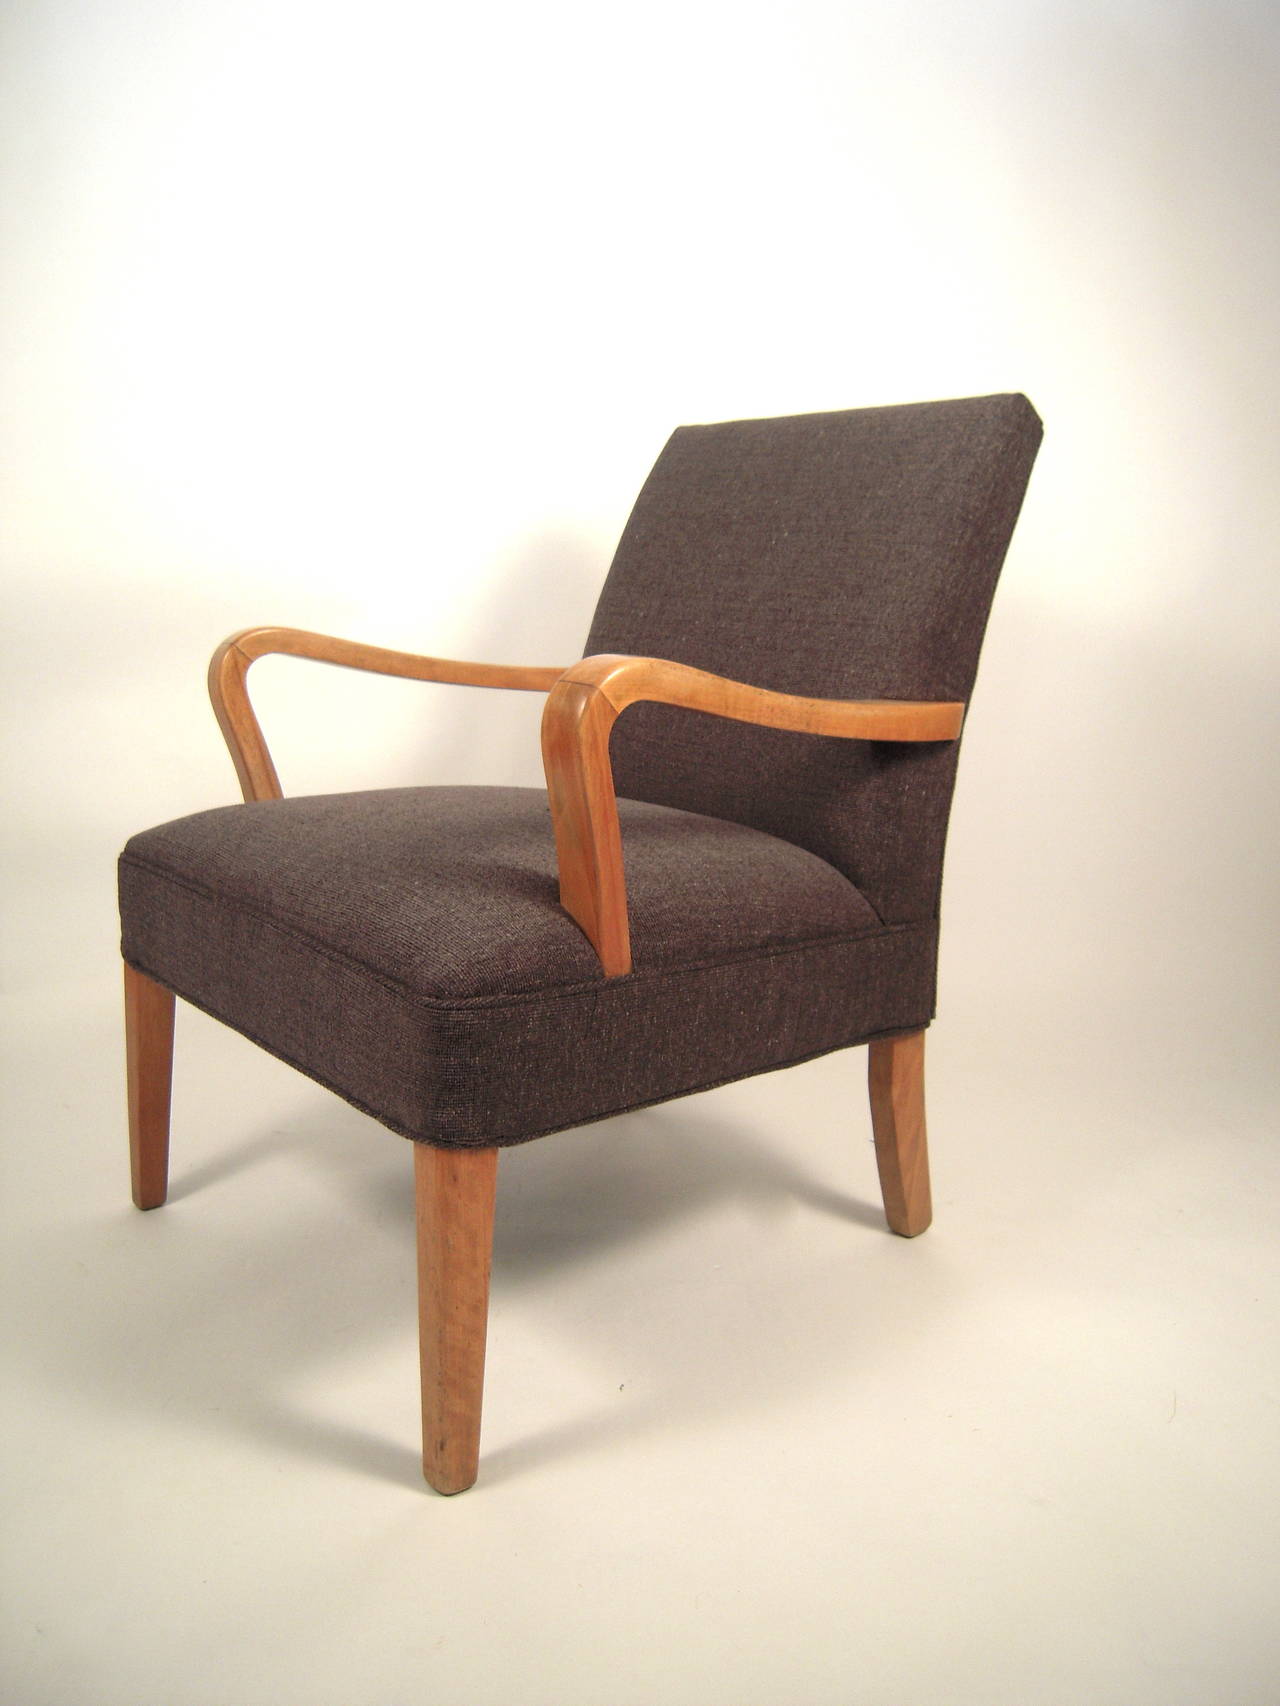 Mid-20th Century Mid-Century Modern Bentwood Upholstered Armchair